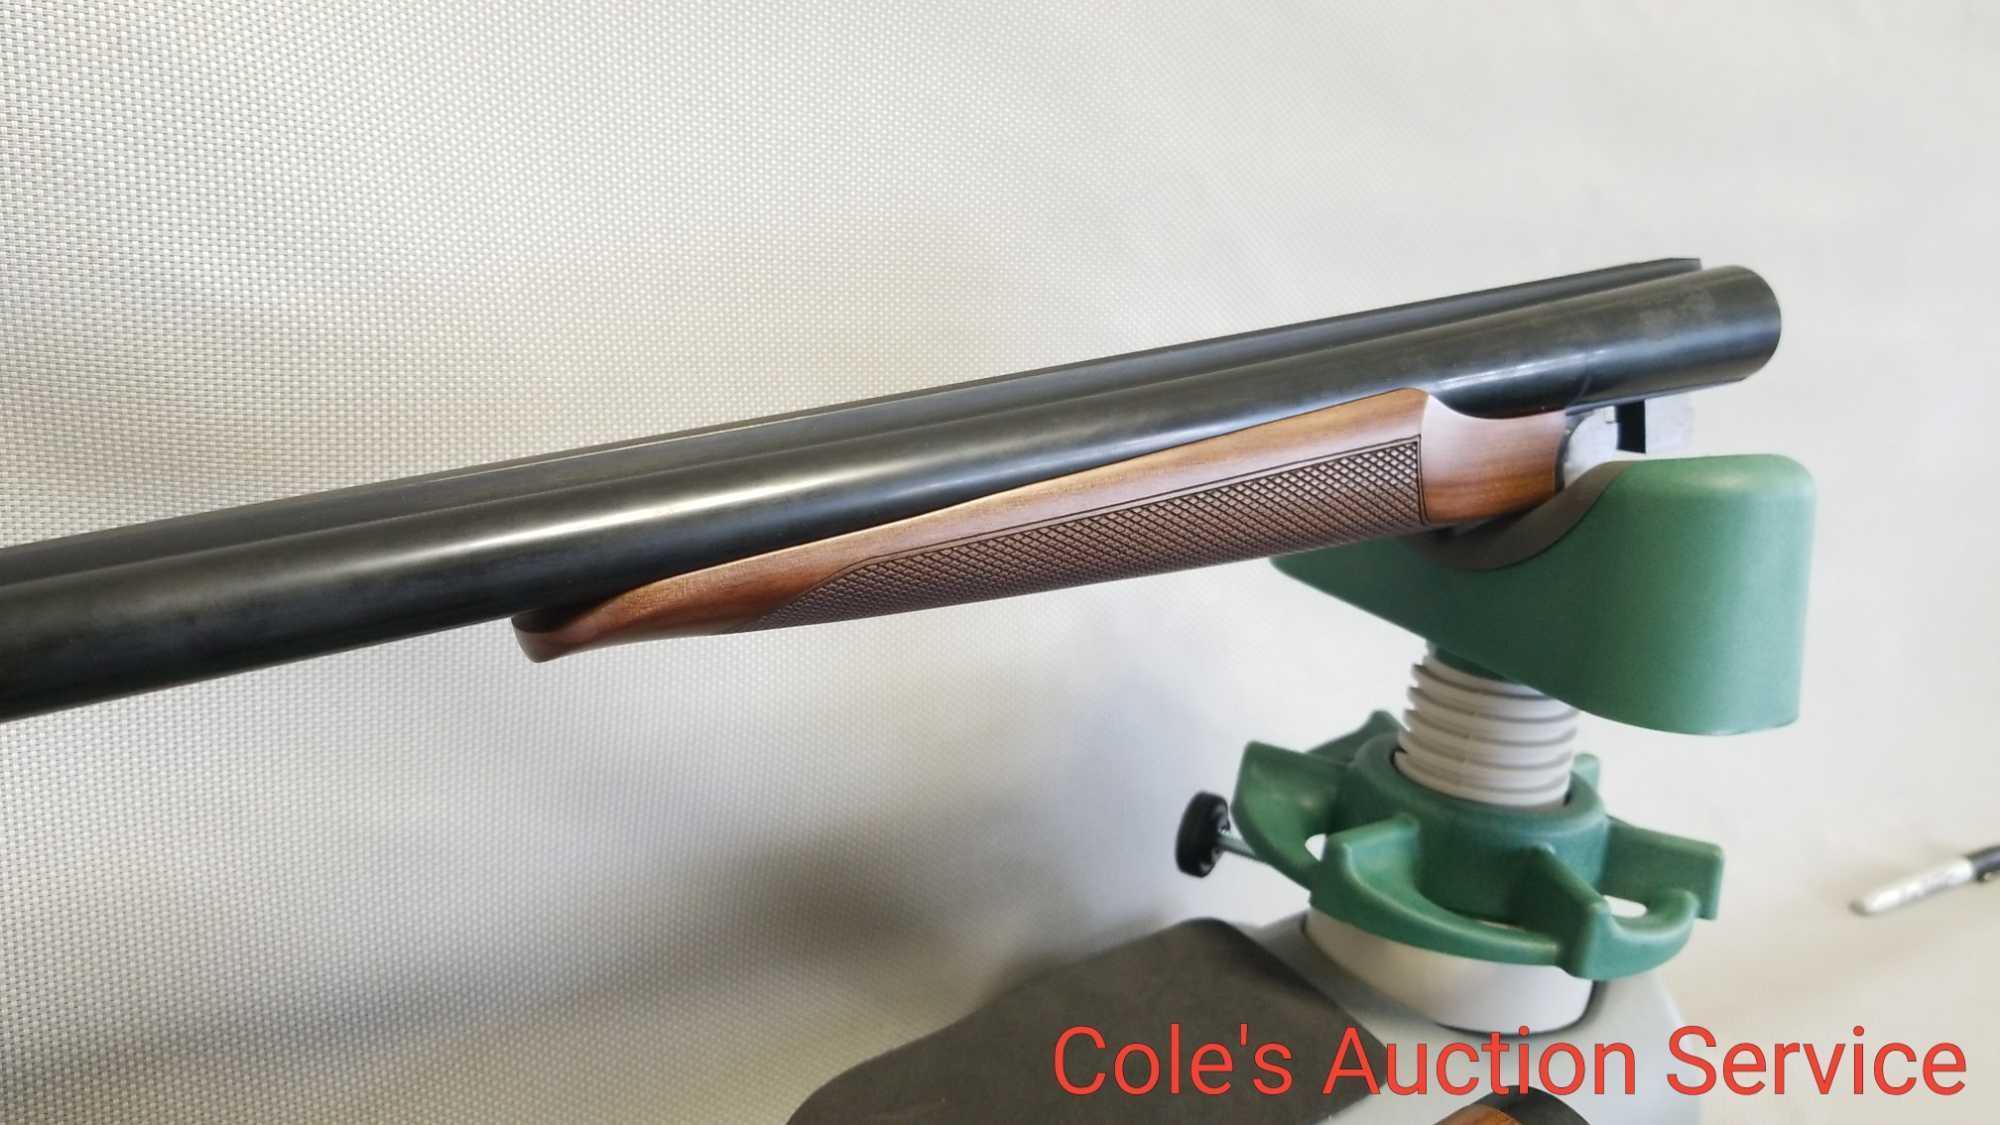 CZ-USA huglu 12 gauge 3 inch double barrel shotgun. In like new condition with case and chokes.